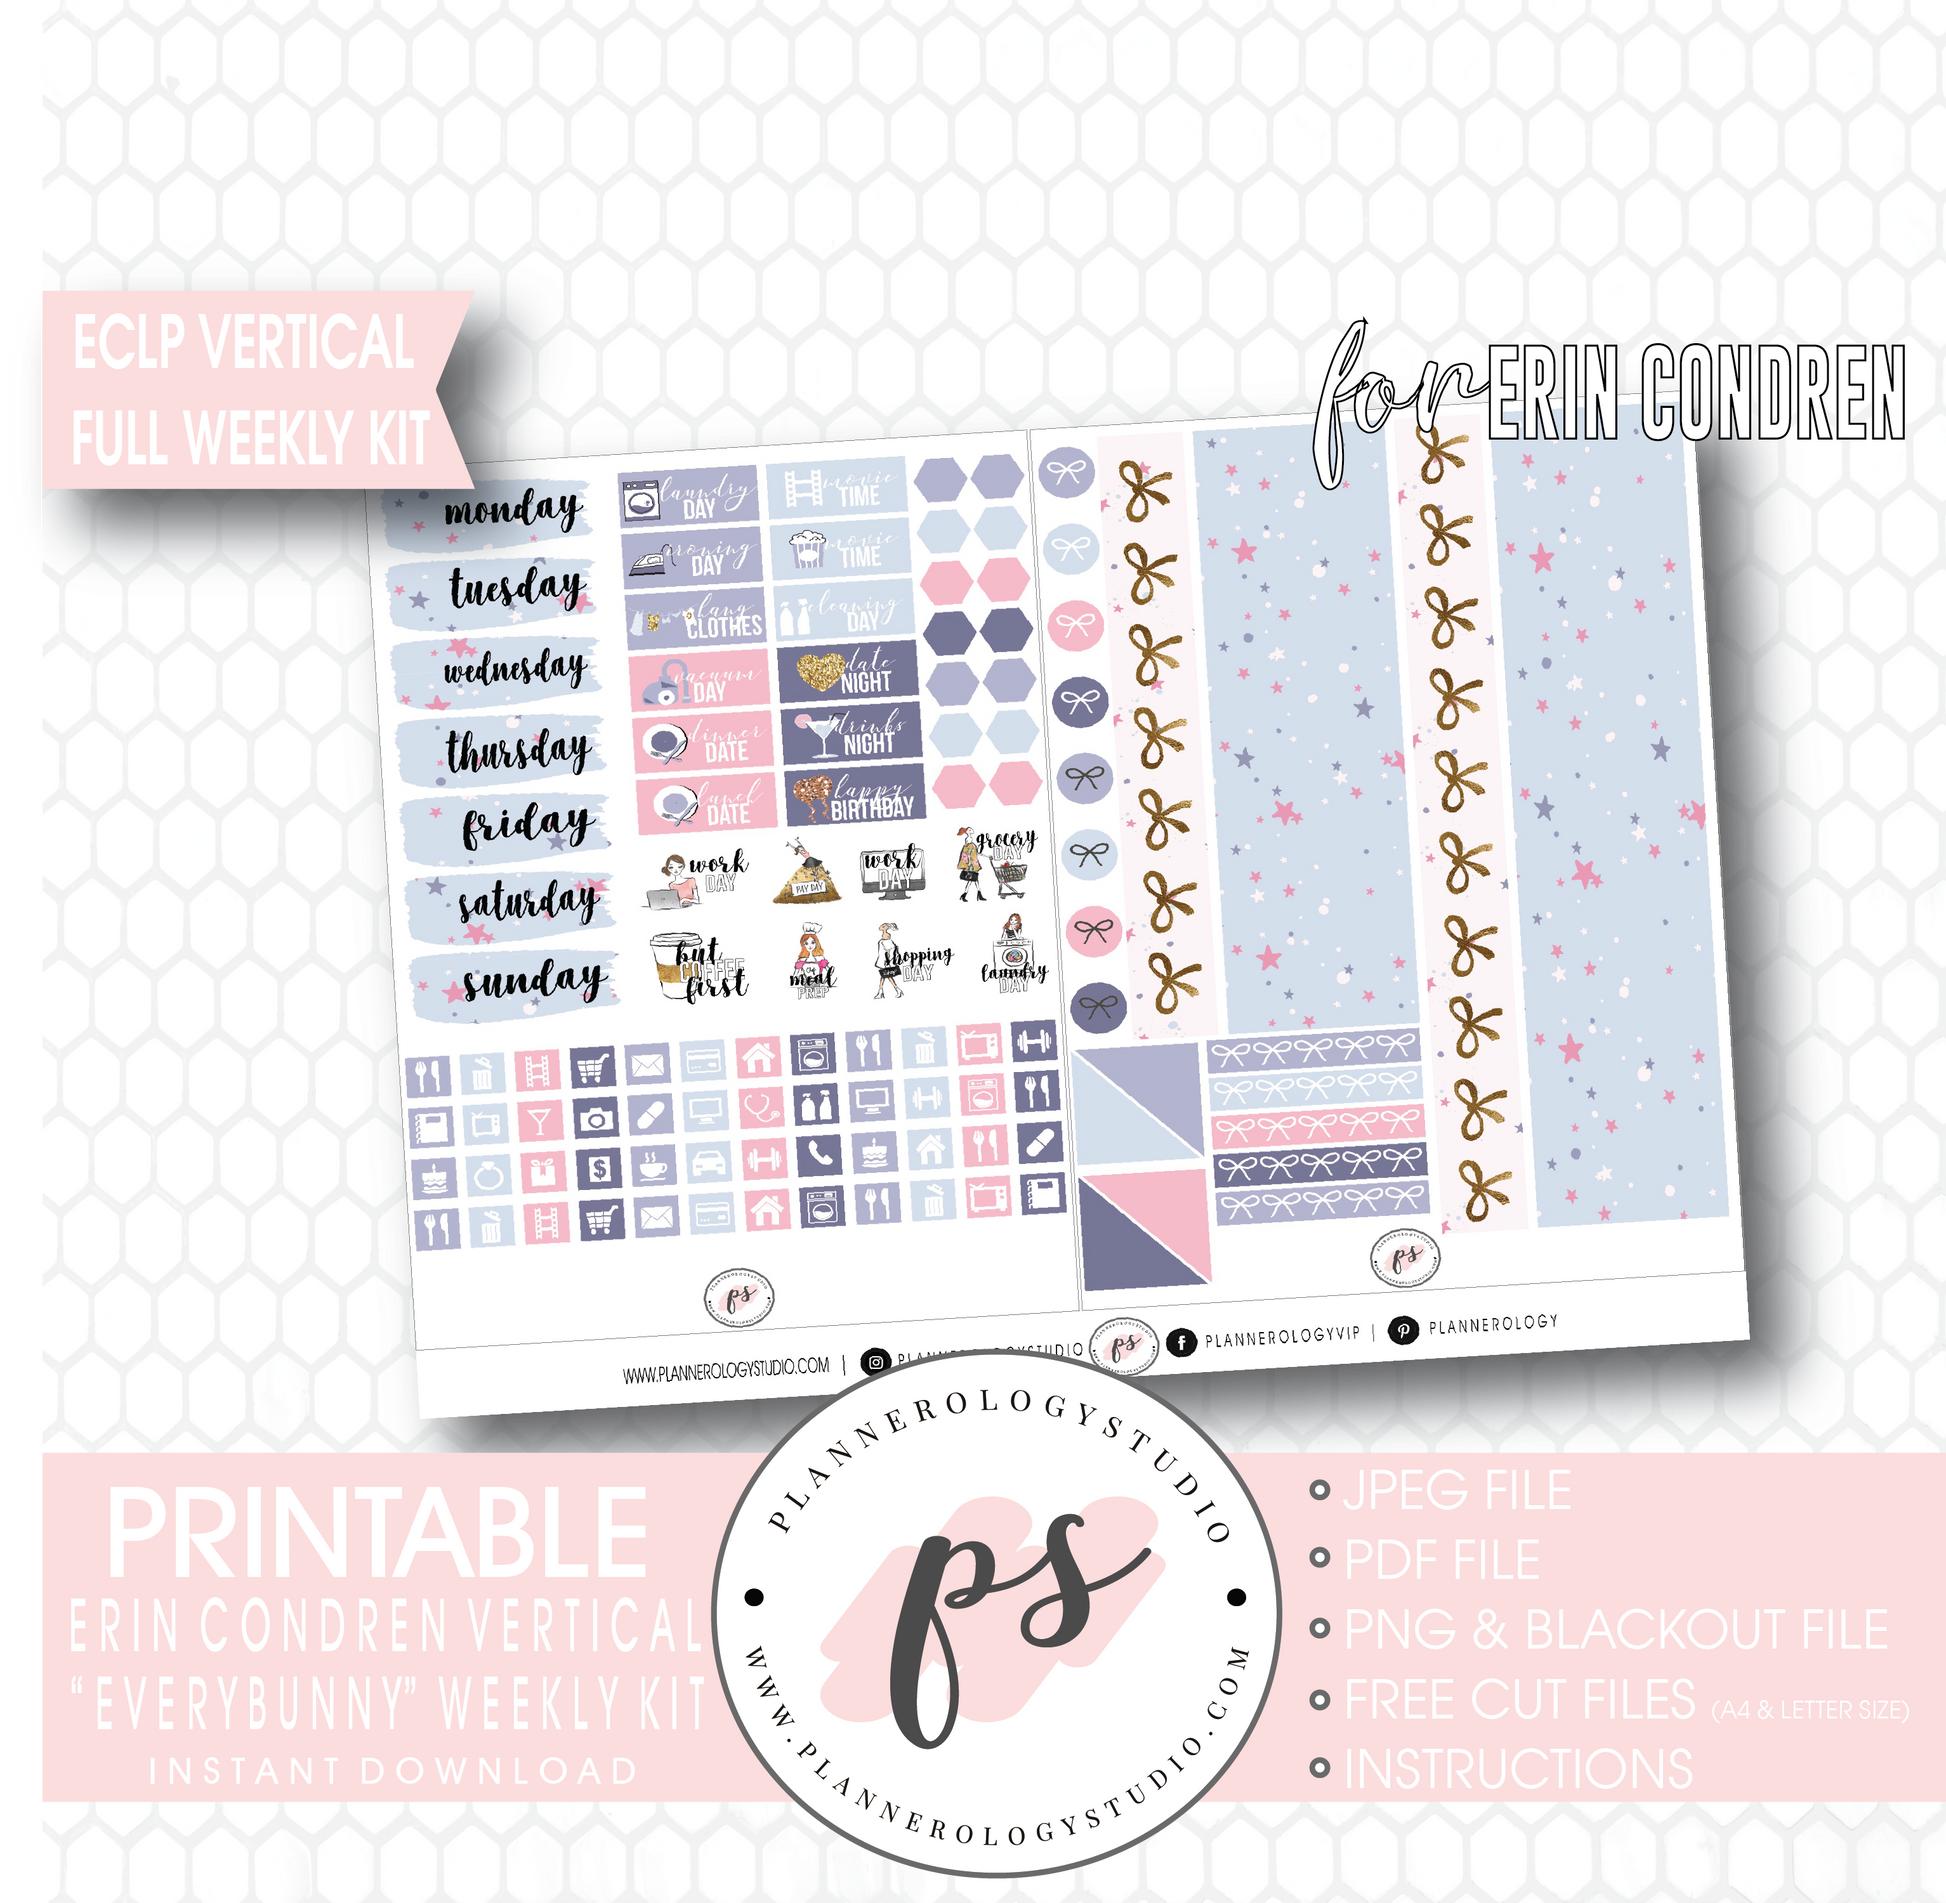 Everbunny (Easter) Weekly Kit Printable Planner Digital Stickers (for use with Erin Condren Vertical - Plannerologystudio